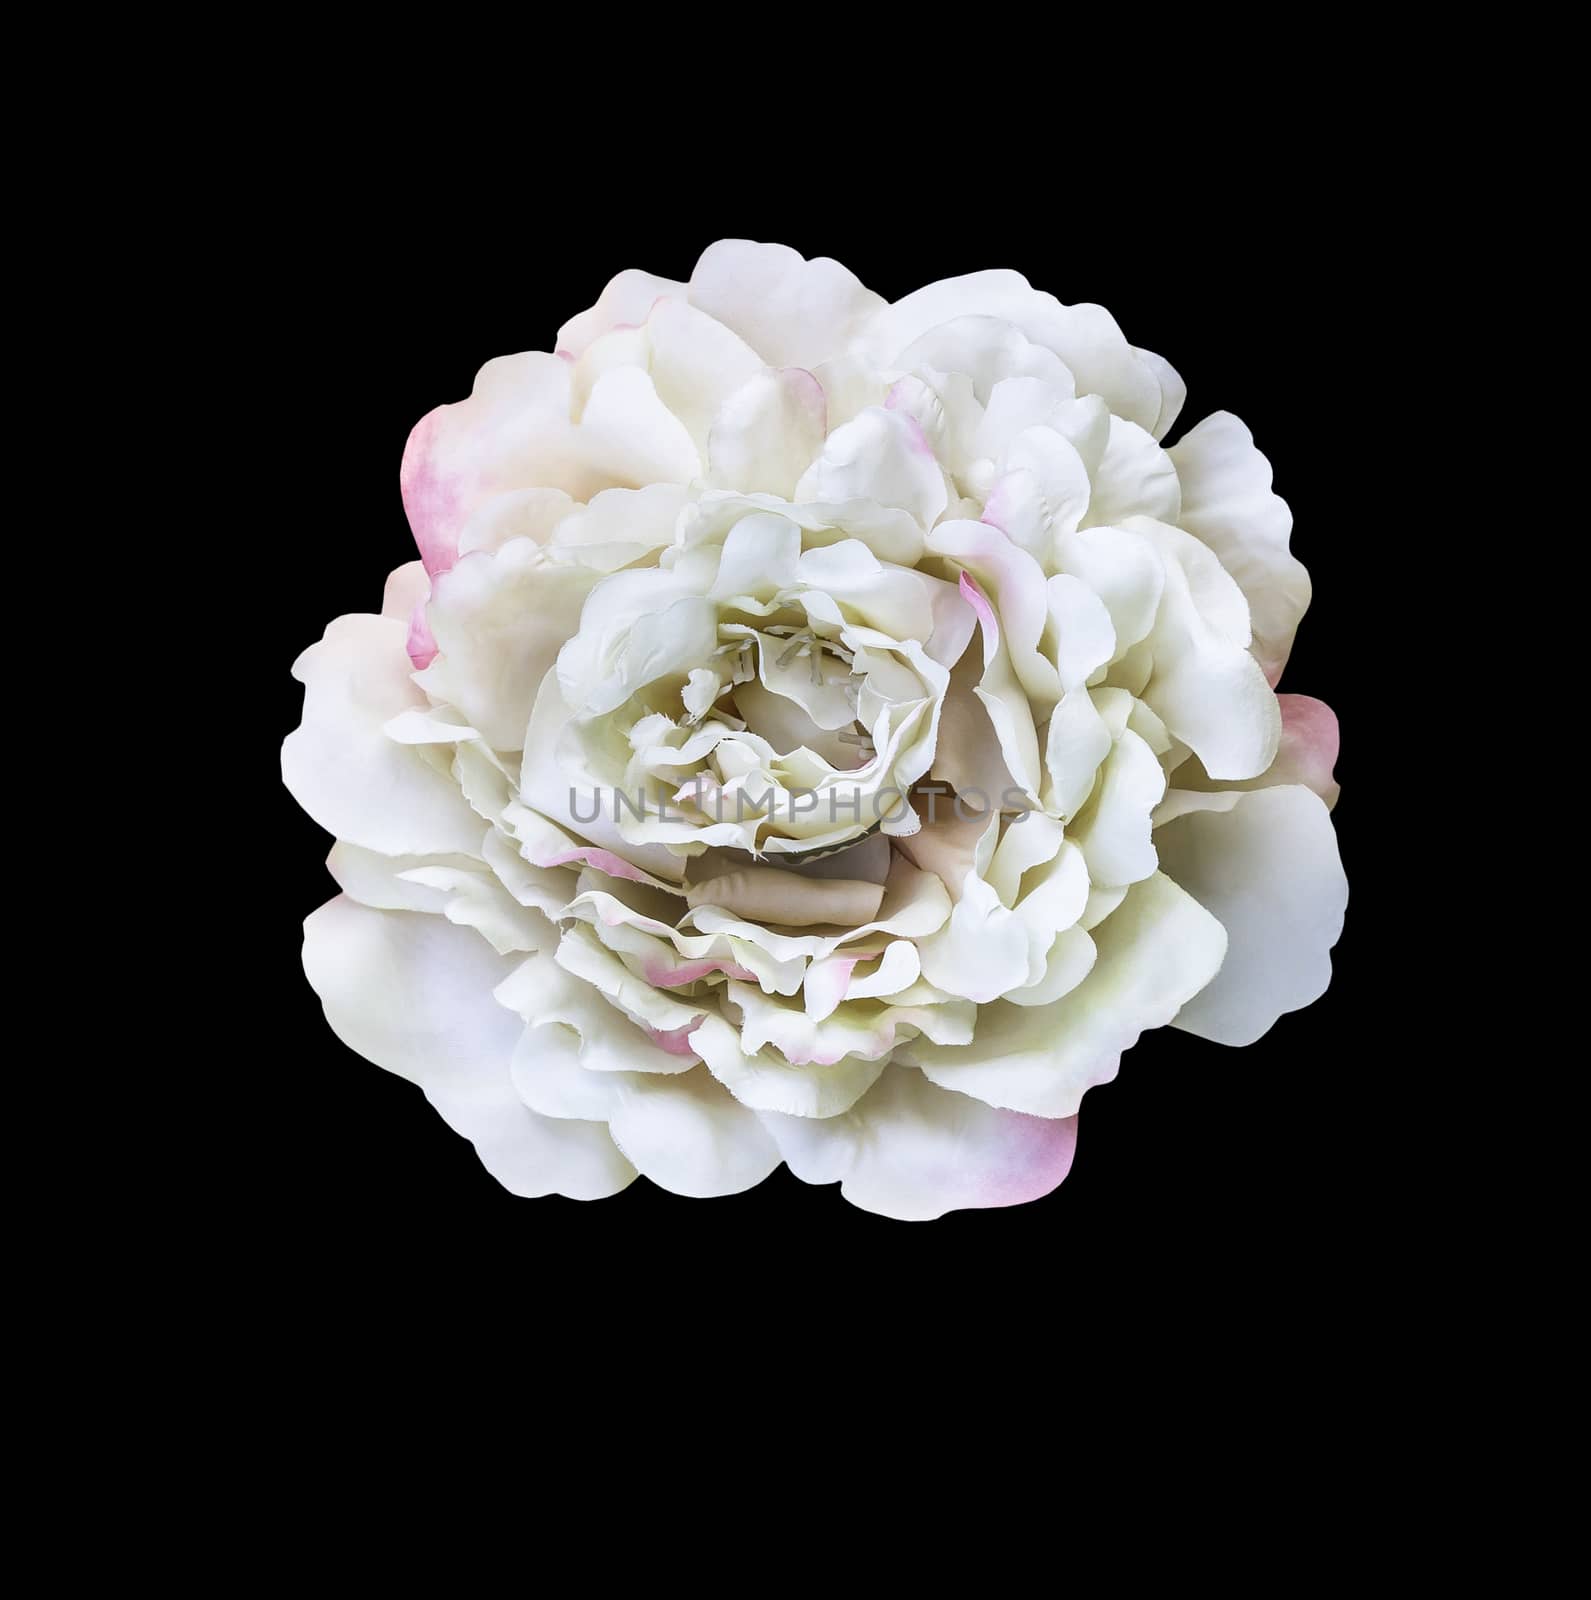 White artificial rose flower isolated on black with clipping path